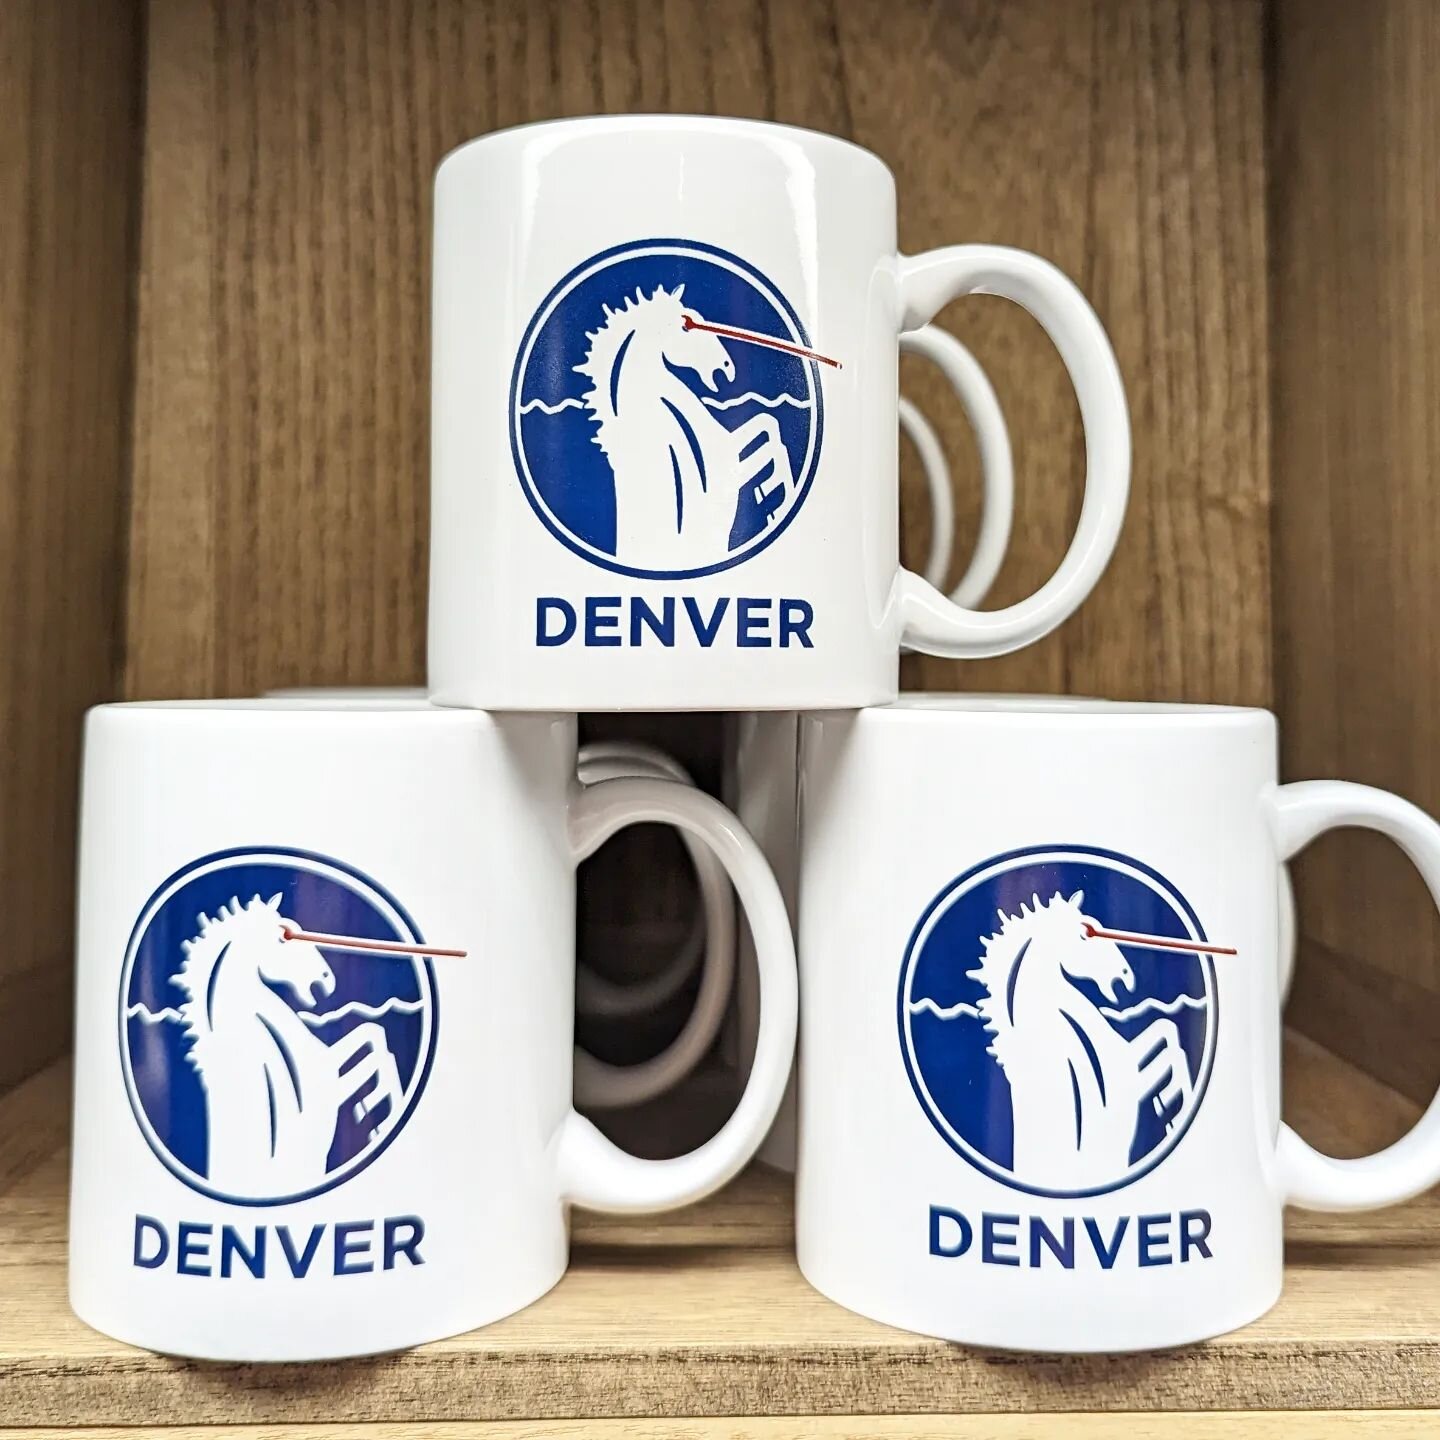 Exclusive coffee mugs can be found at I Heart Denver Store. Locally designed and printed!

#iheartdenverstore #coffeemug #localdesign #horse #downtowndenver #denverstore #giftideas #16thstreetmall